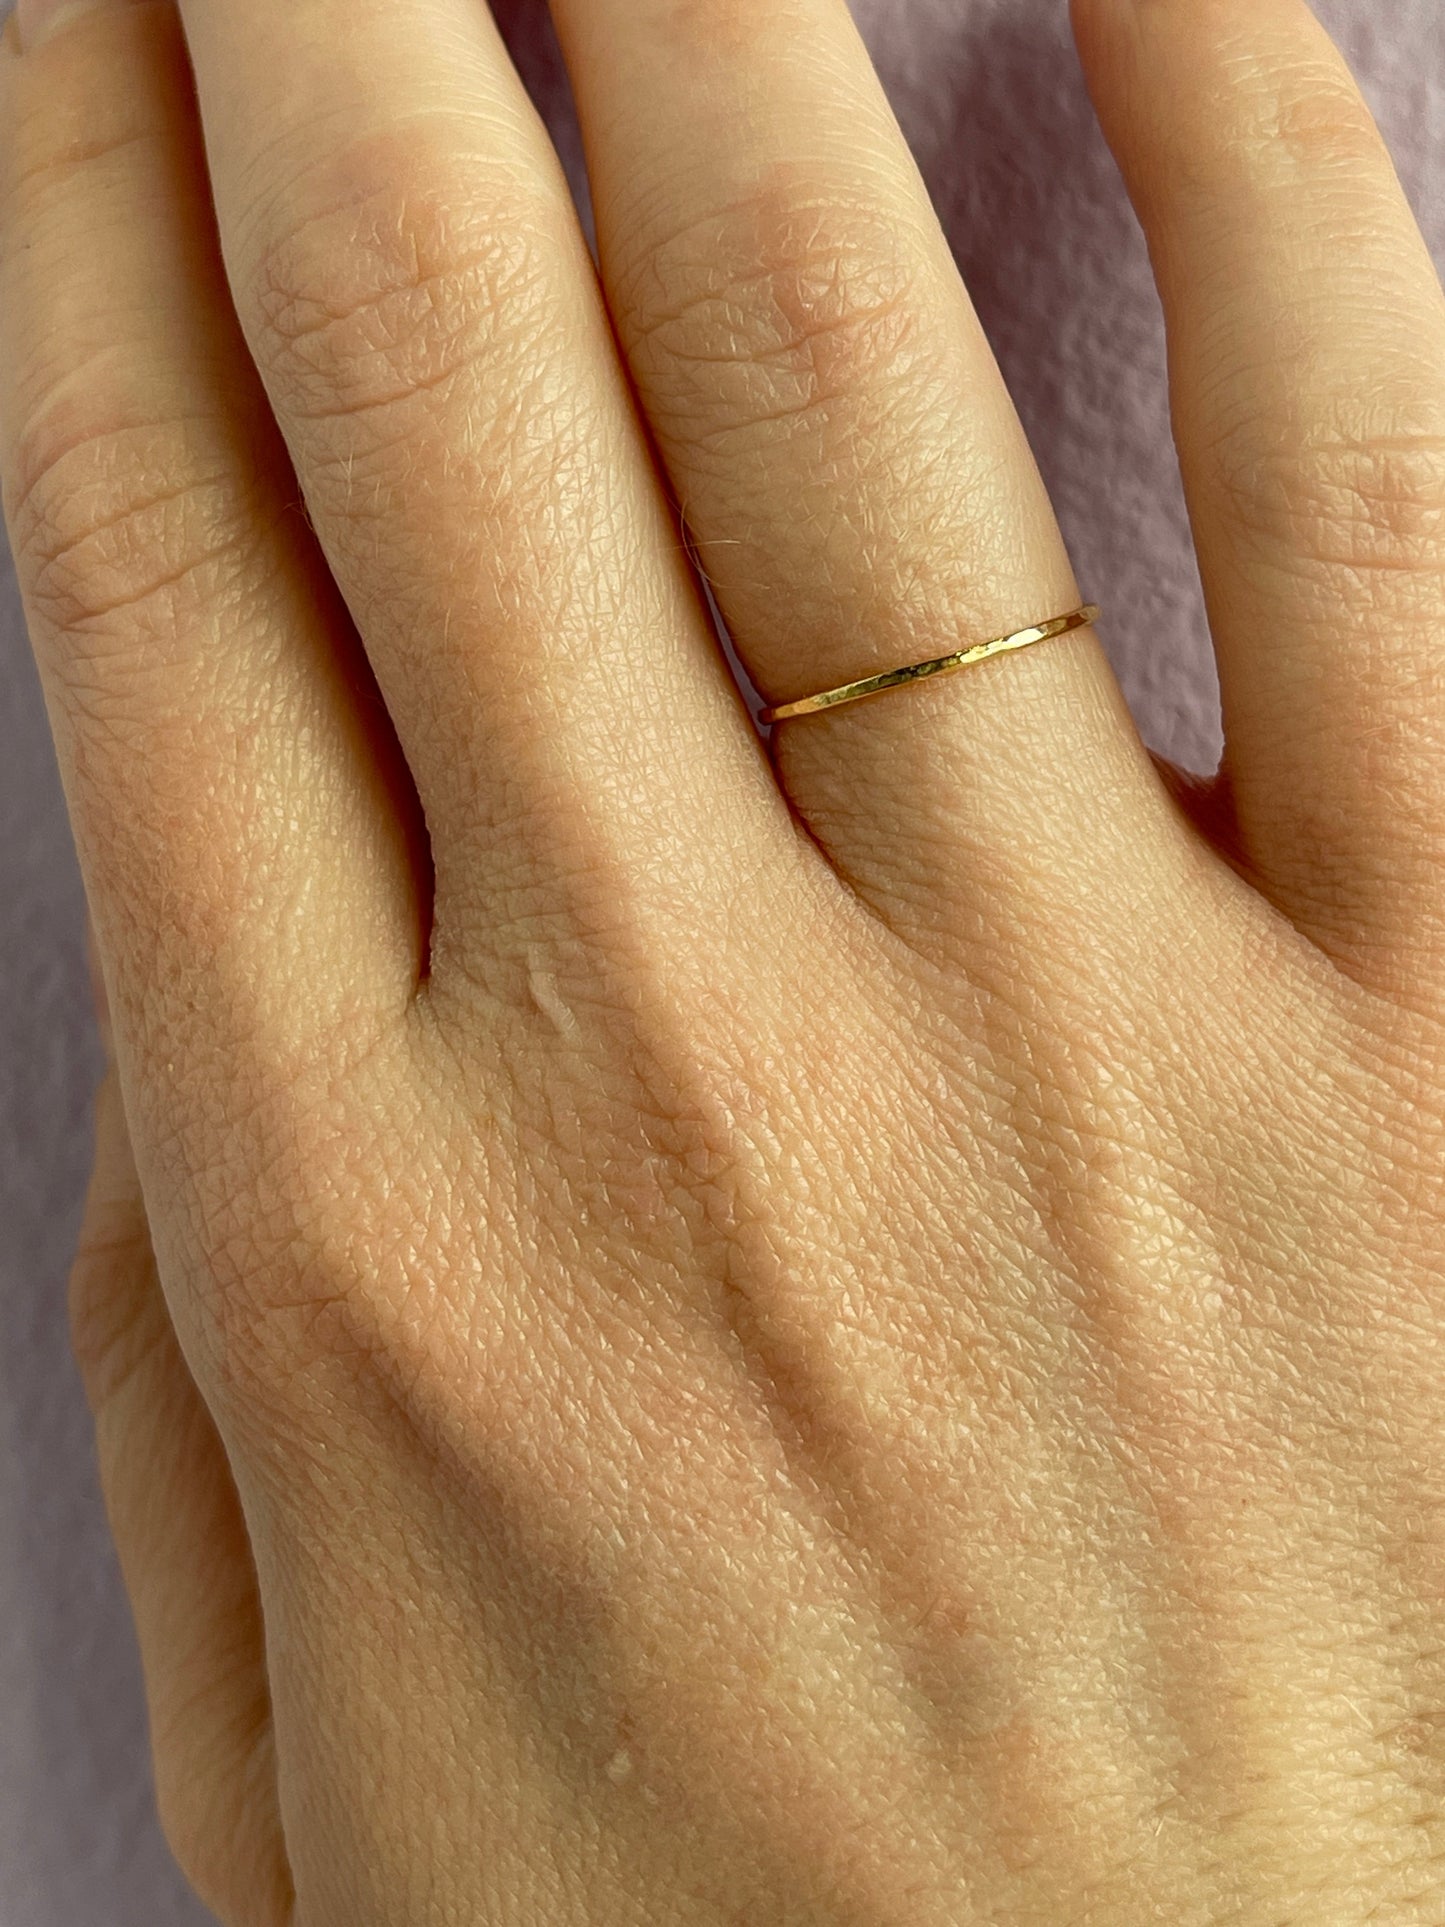 Load image into Gallery viewer, Whisper of Gold Hammered Band in 9ct Yellow Gold, size P (In Stock)
